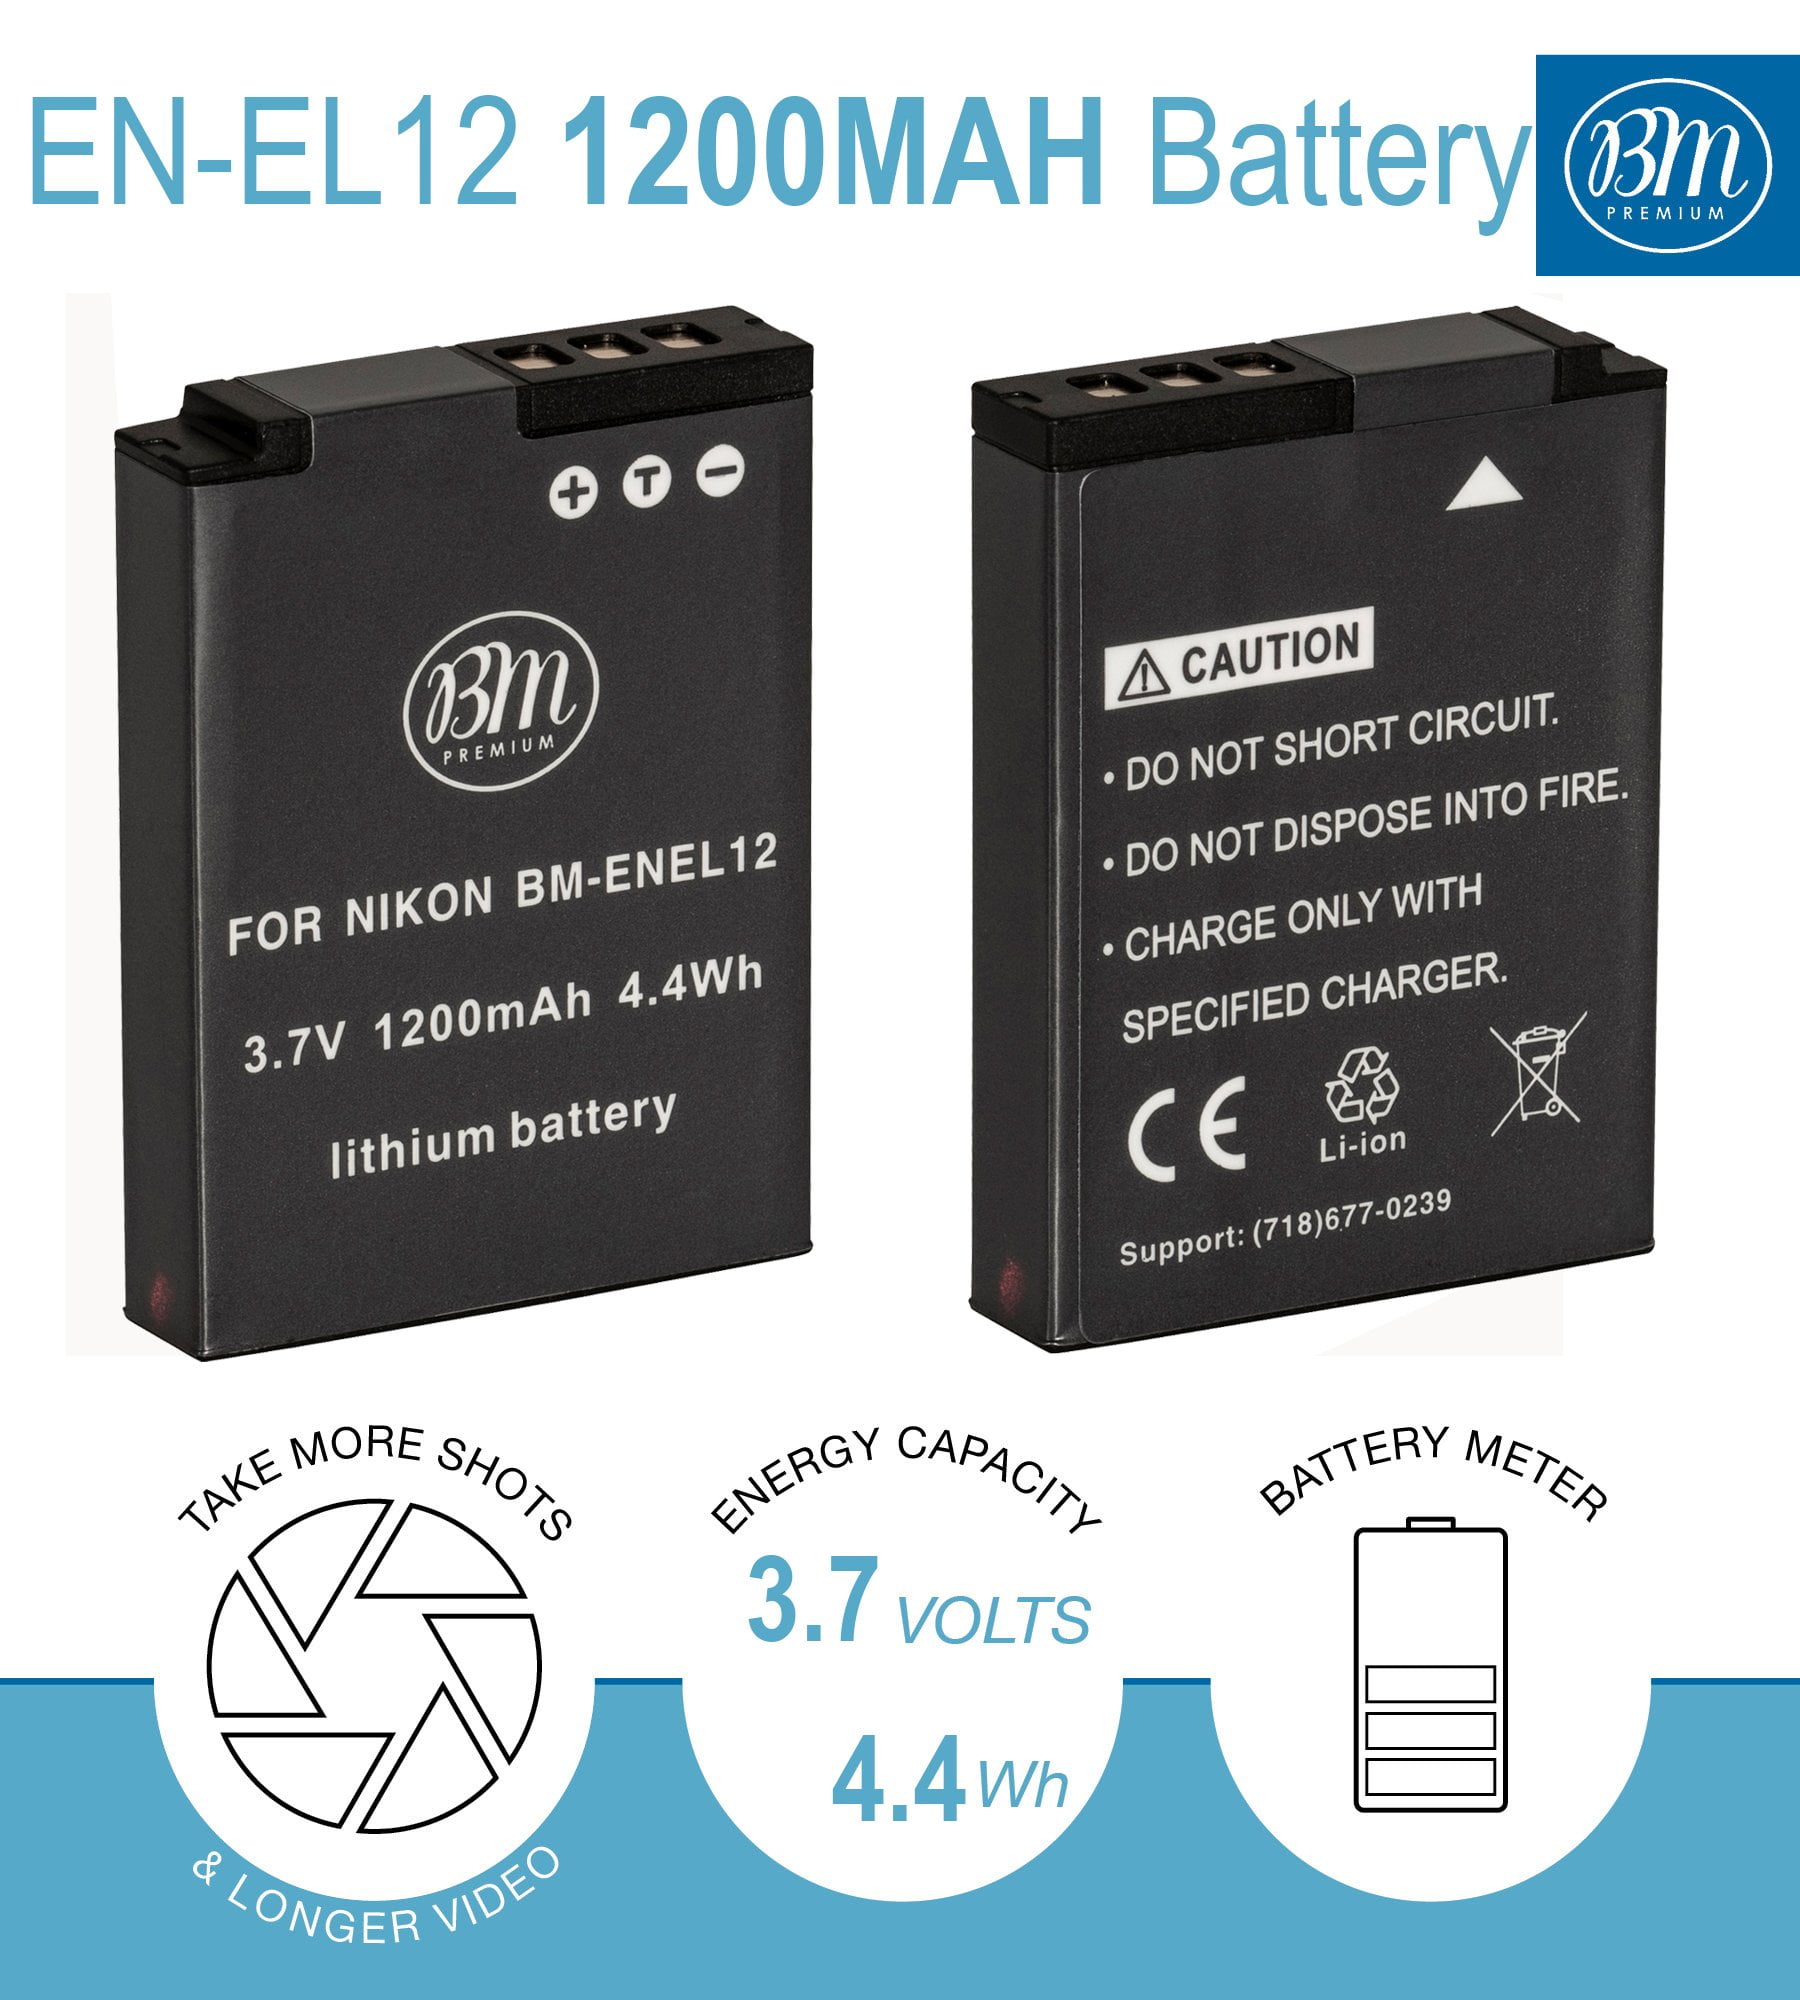 X2 ENEL12 Kastar Battery S70 S6200 S9600 & LCD Slim USB Charger for Nikon EN-EL12 AW120 S6300 More S800c AW110 S9700 S8100 S9500 S31 Digital Cameras MH-65 Coolpix S9900 S9100 